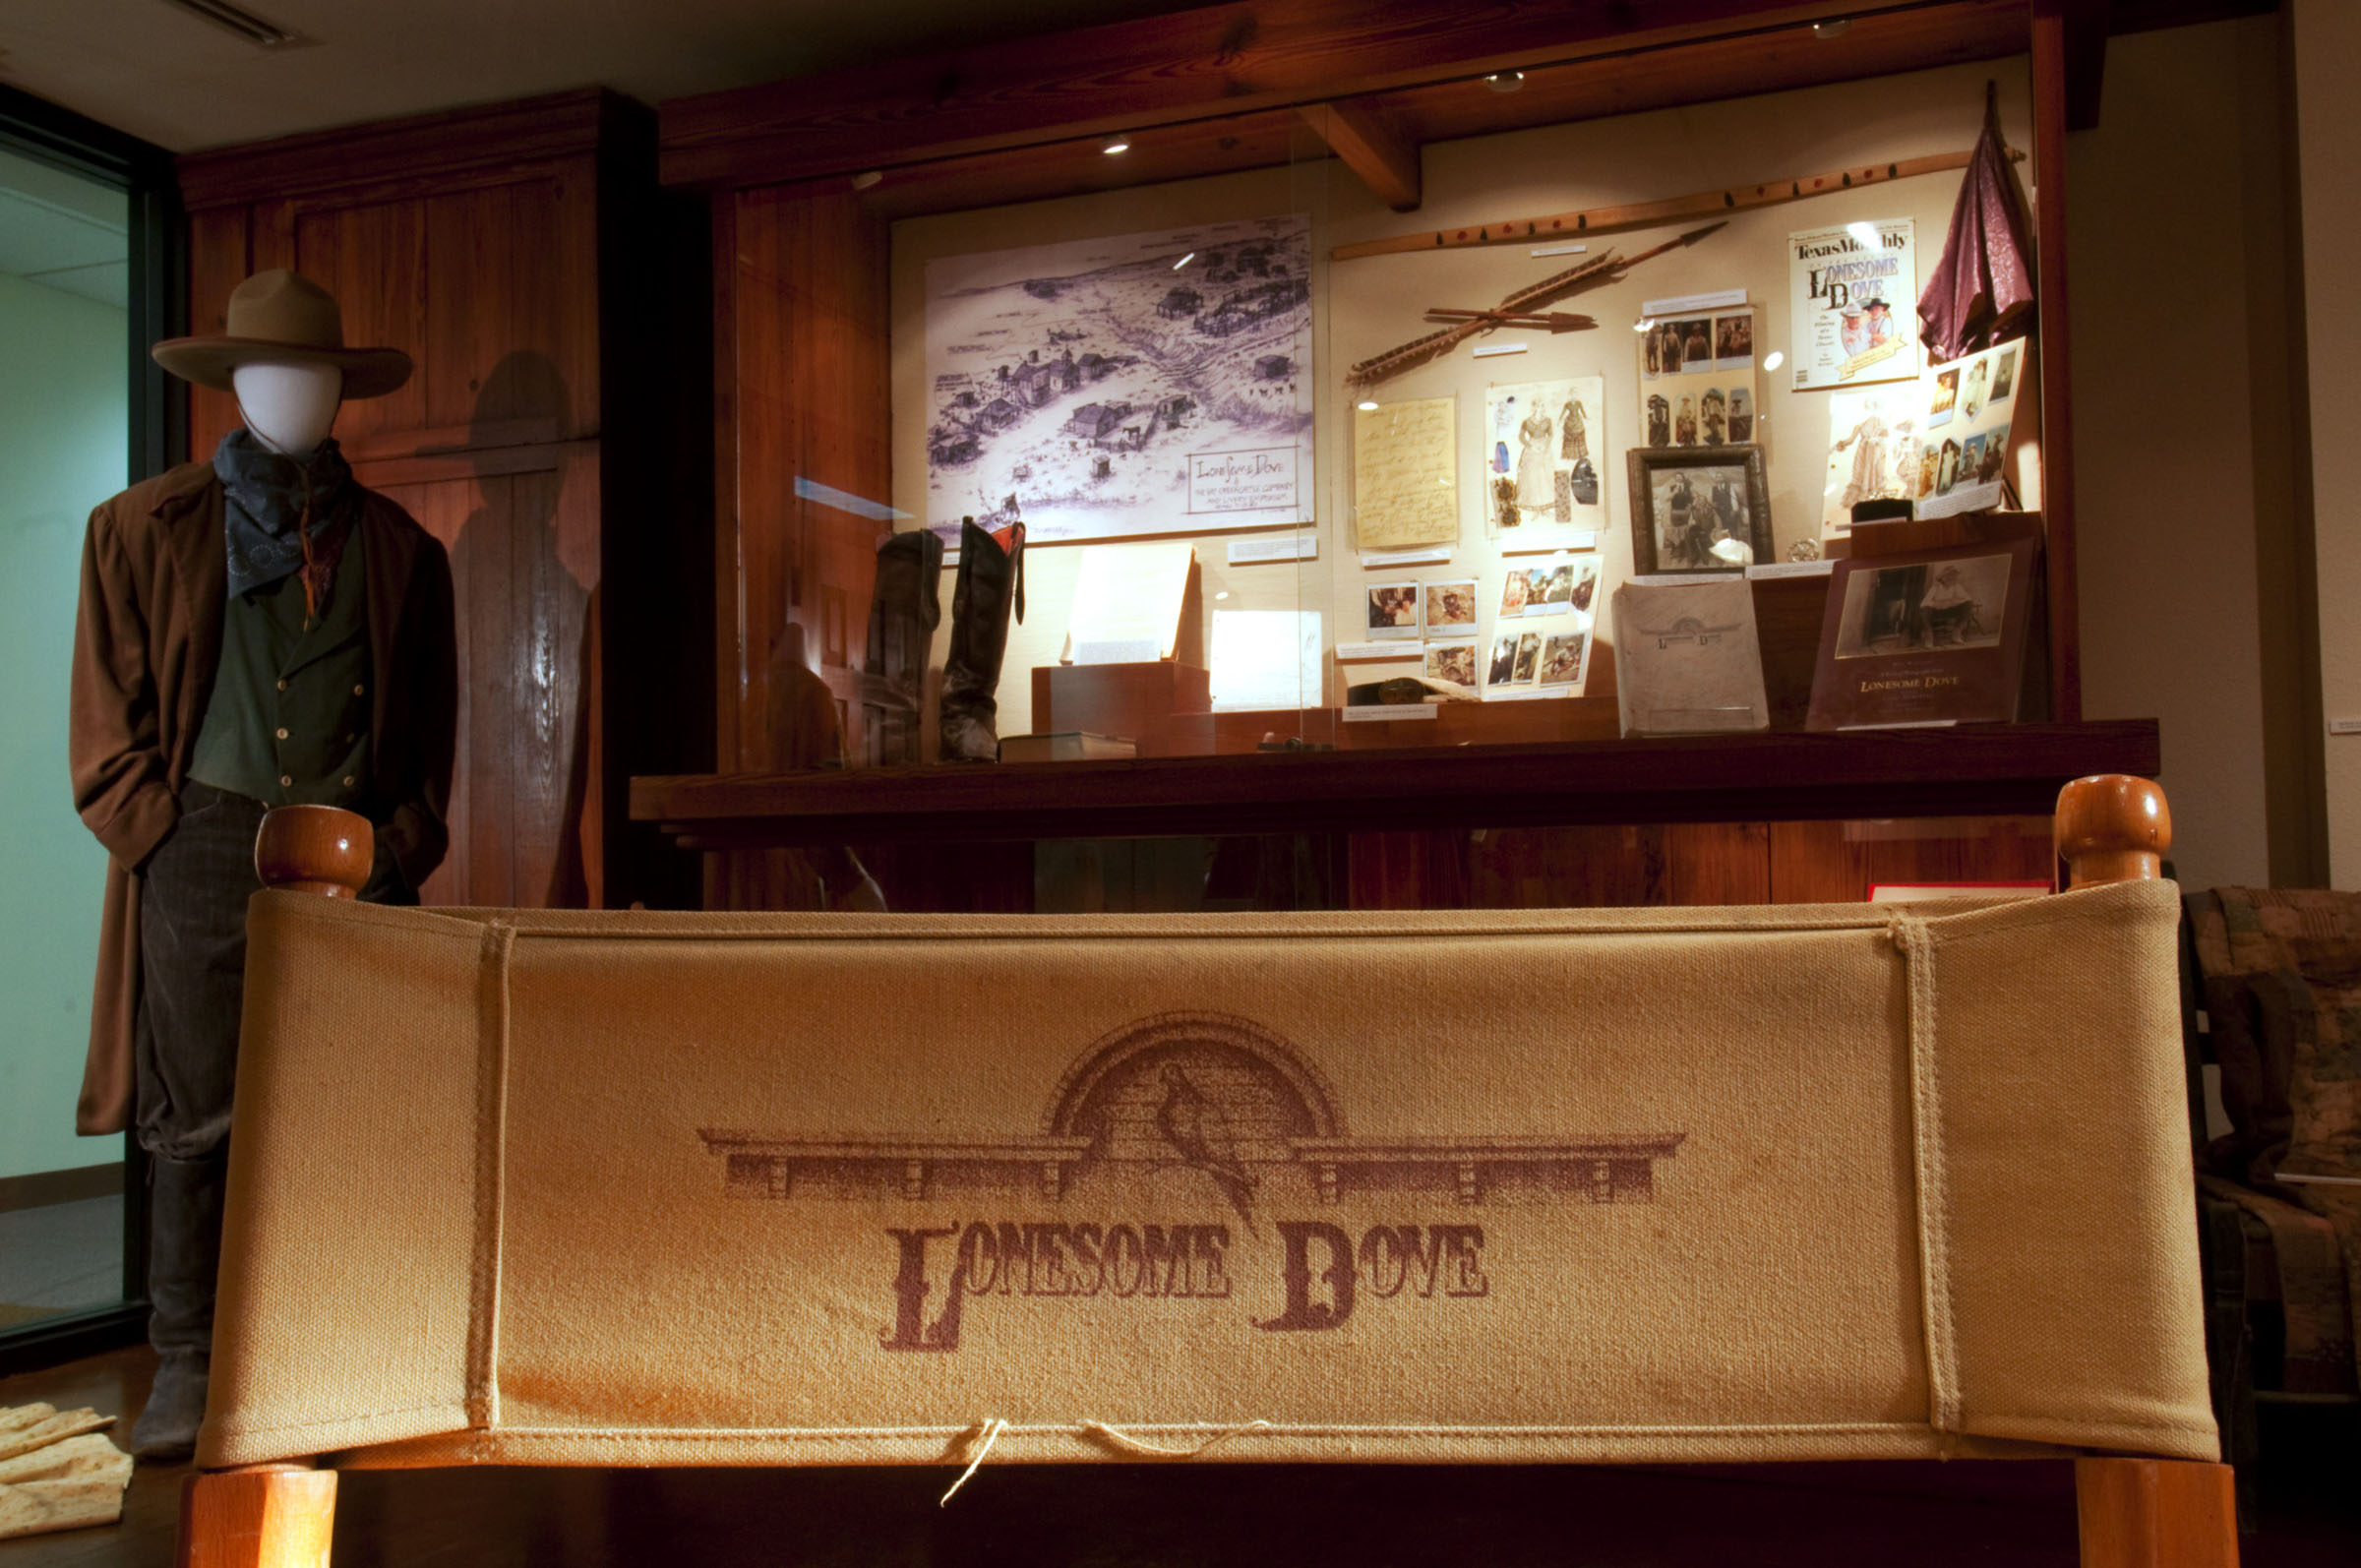 A collection of Lonesome Dove artifacts including a chair, clothes and more on display in a museum